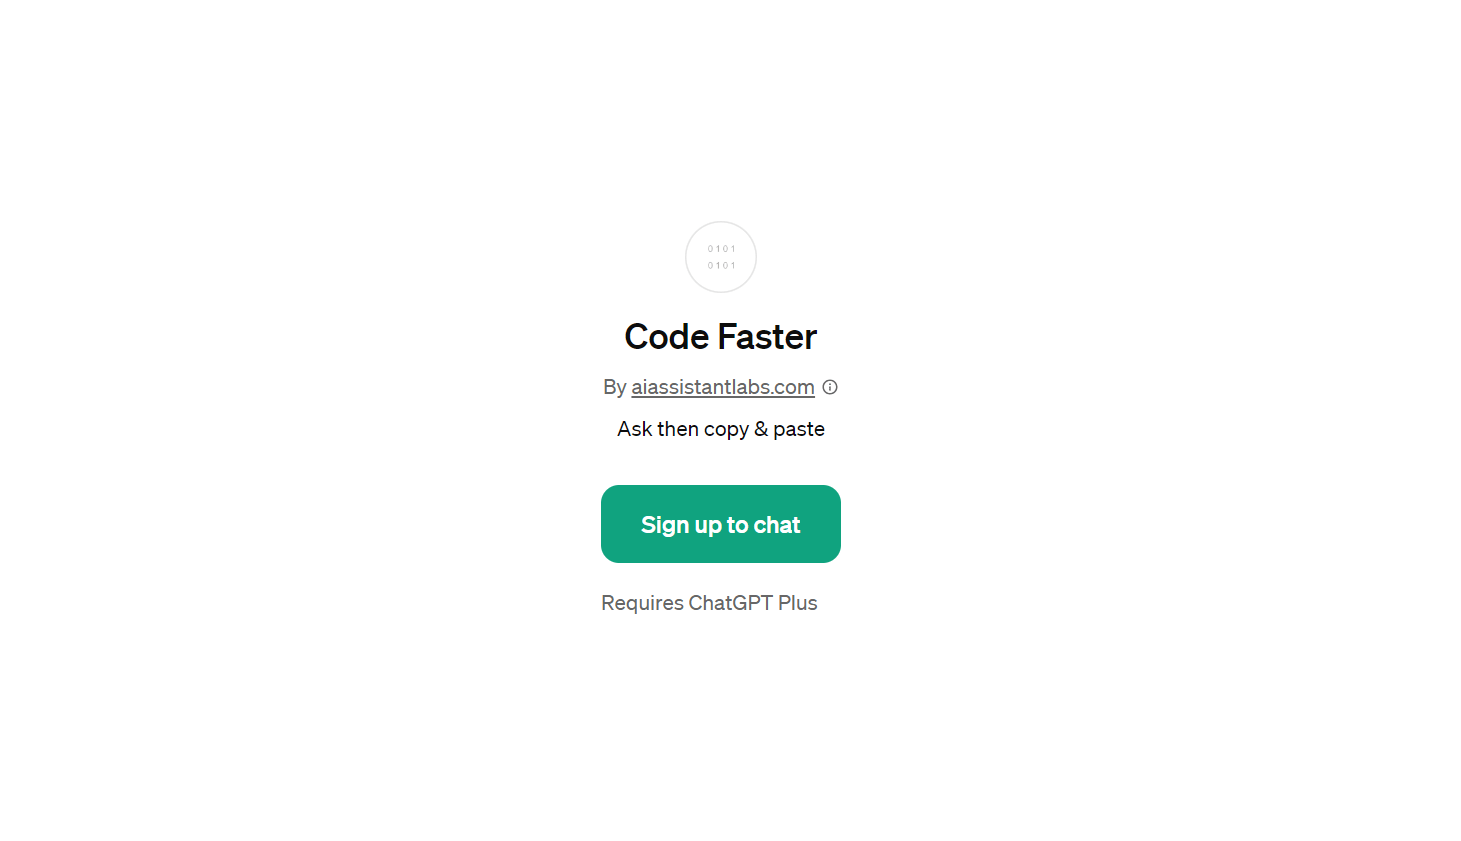 Code Faster - Copy and Paste the Code Snippets You Need